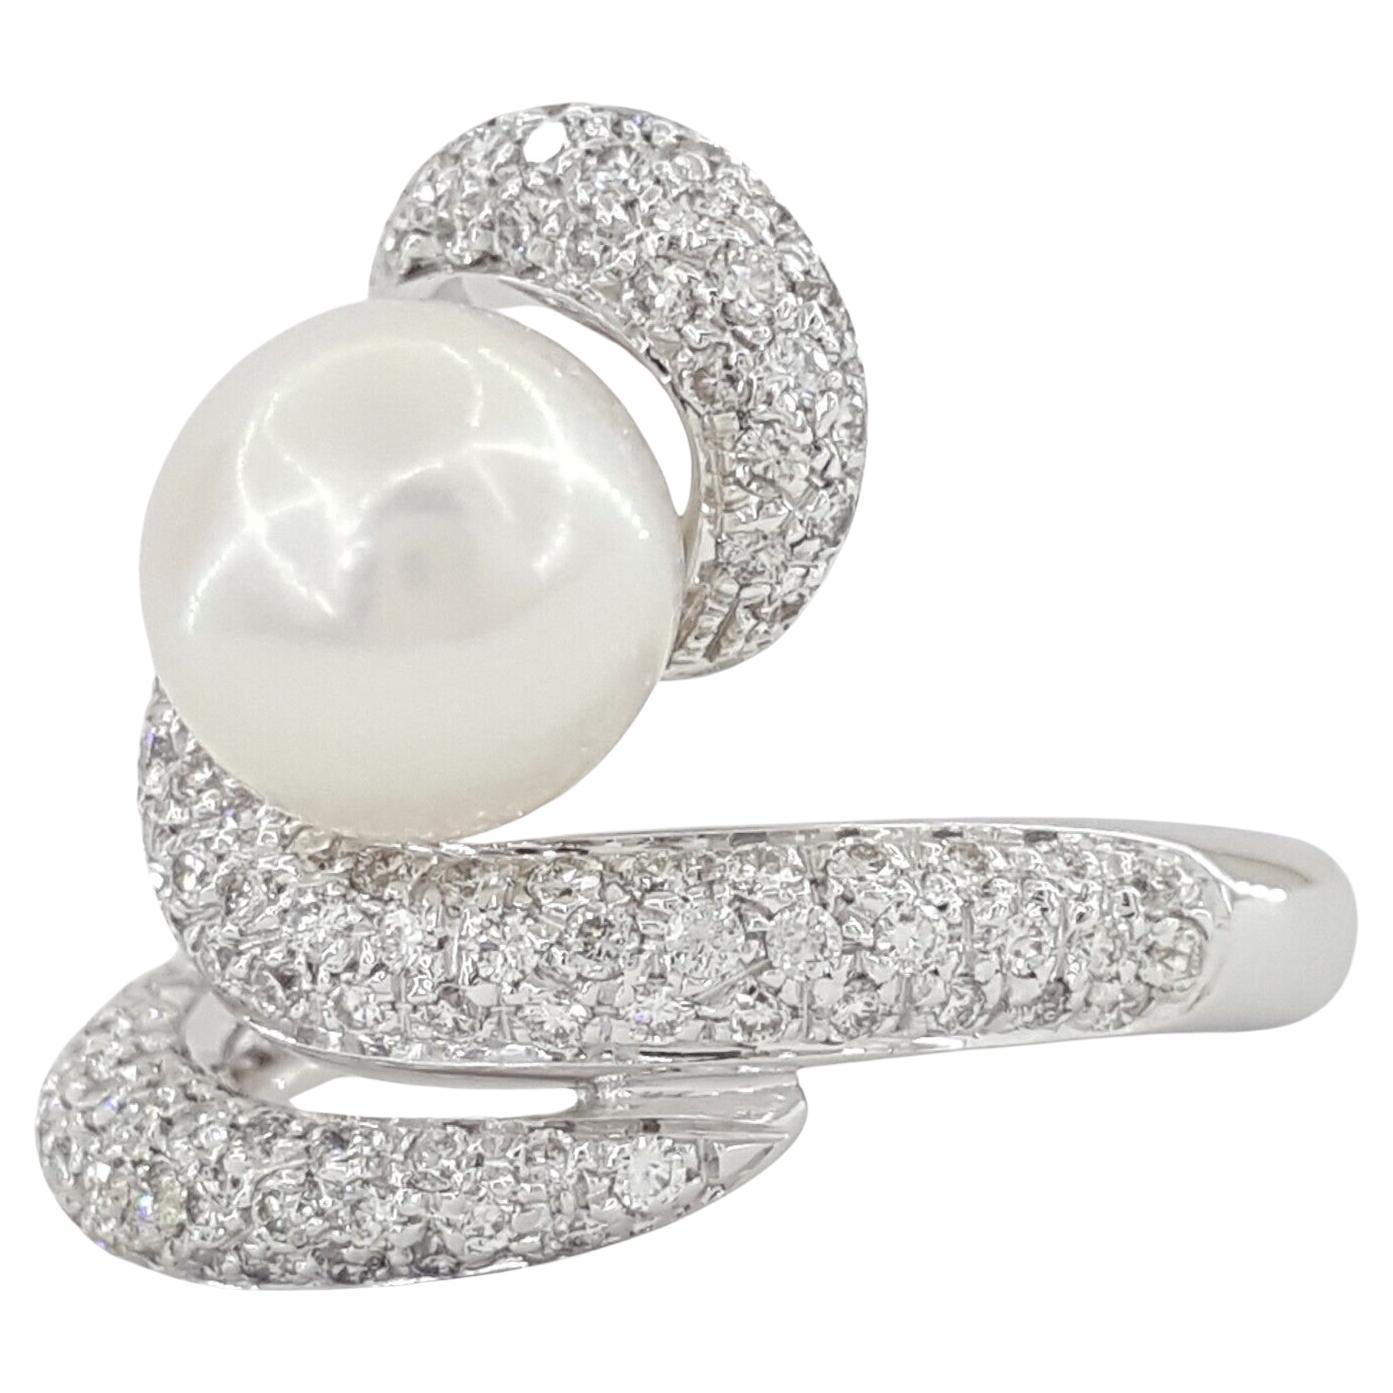 18K White Gold Ring featuring a 9mm Akoya Pearl and a captivating design with a 1.16 ct Round Brilliant Cut Diamond Snake/Swirl pattern. Weighing 10 grams, this ring is designed to fit finger sizes 6-7, thanks to its unique shape and sizing beads